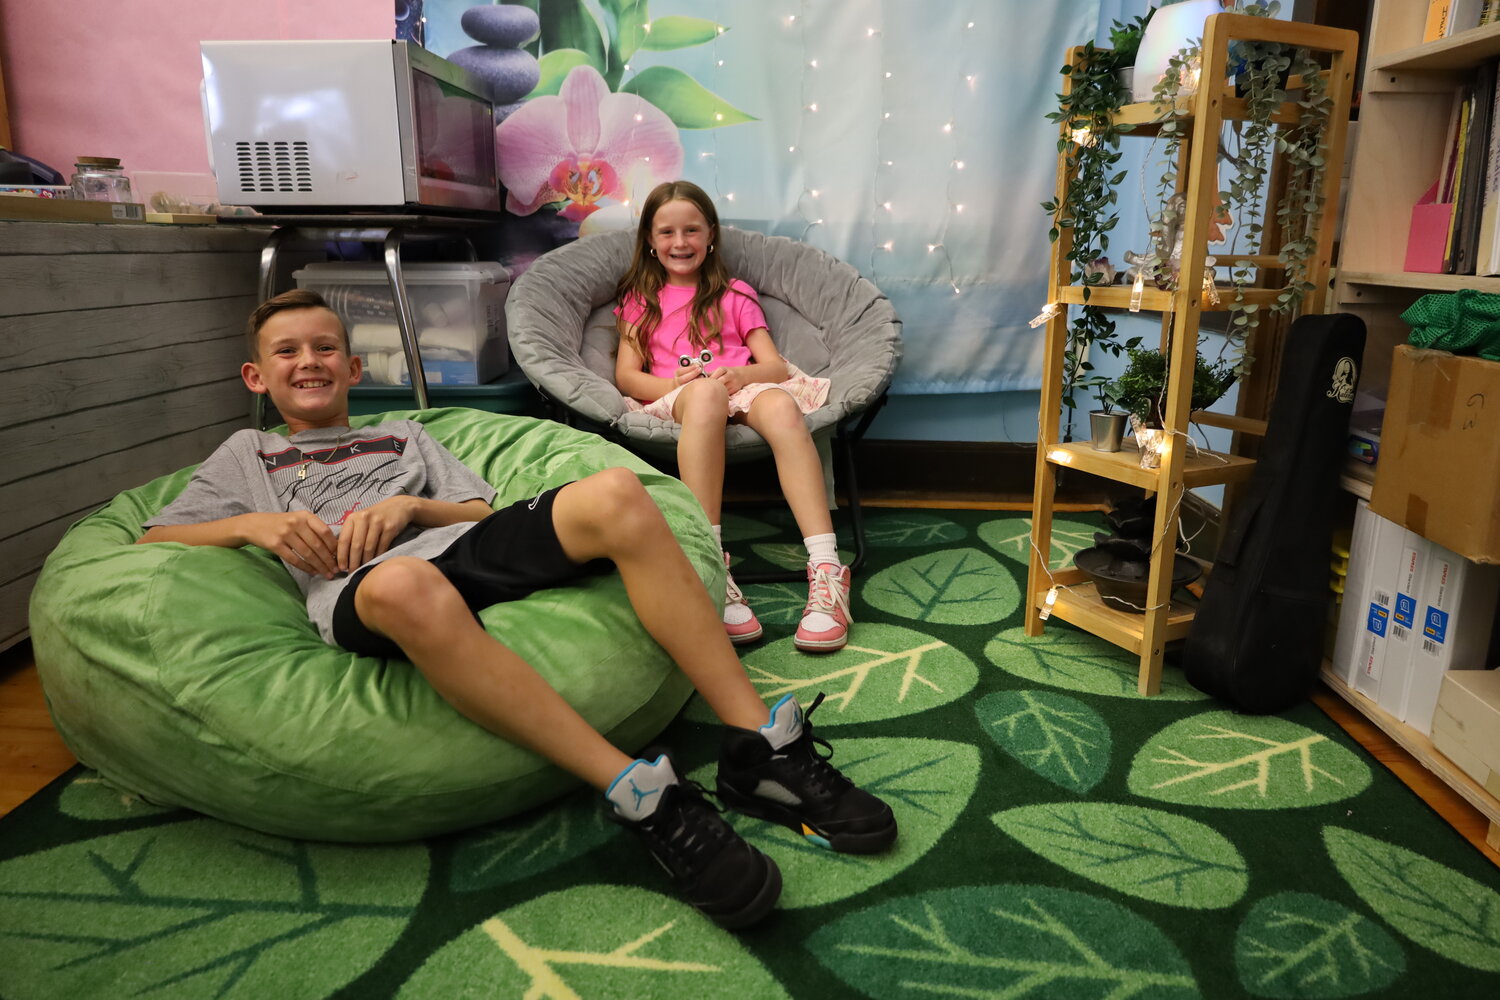 Kids get comfy in their lily pad themed environment at Wilson Elementary.